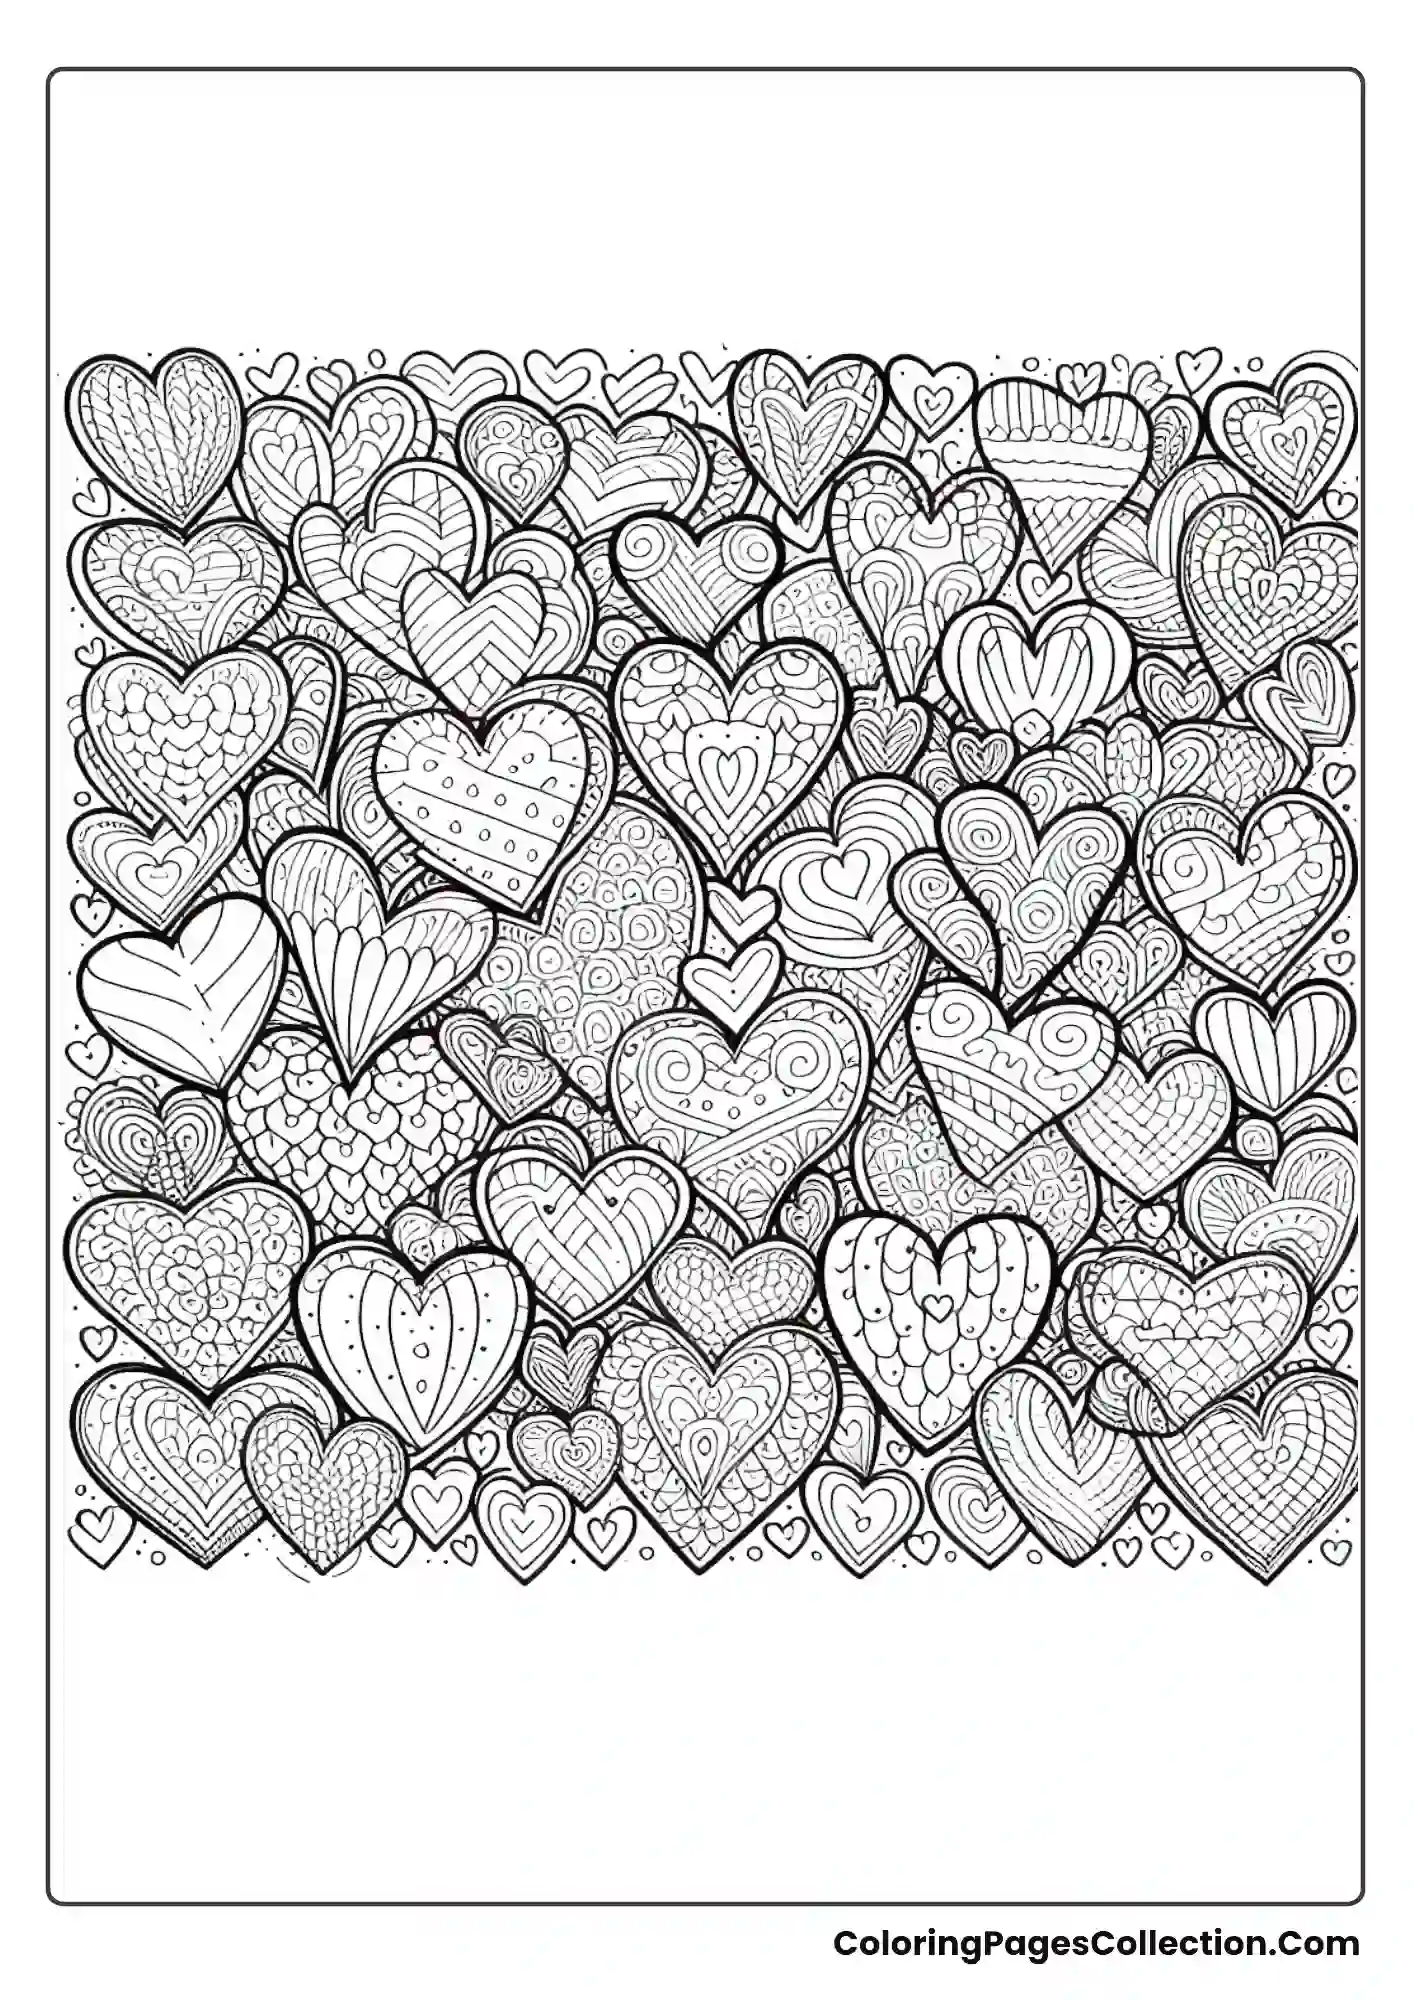 A Page Filled With Repeating Heart Shapes In Various Sizes